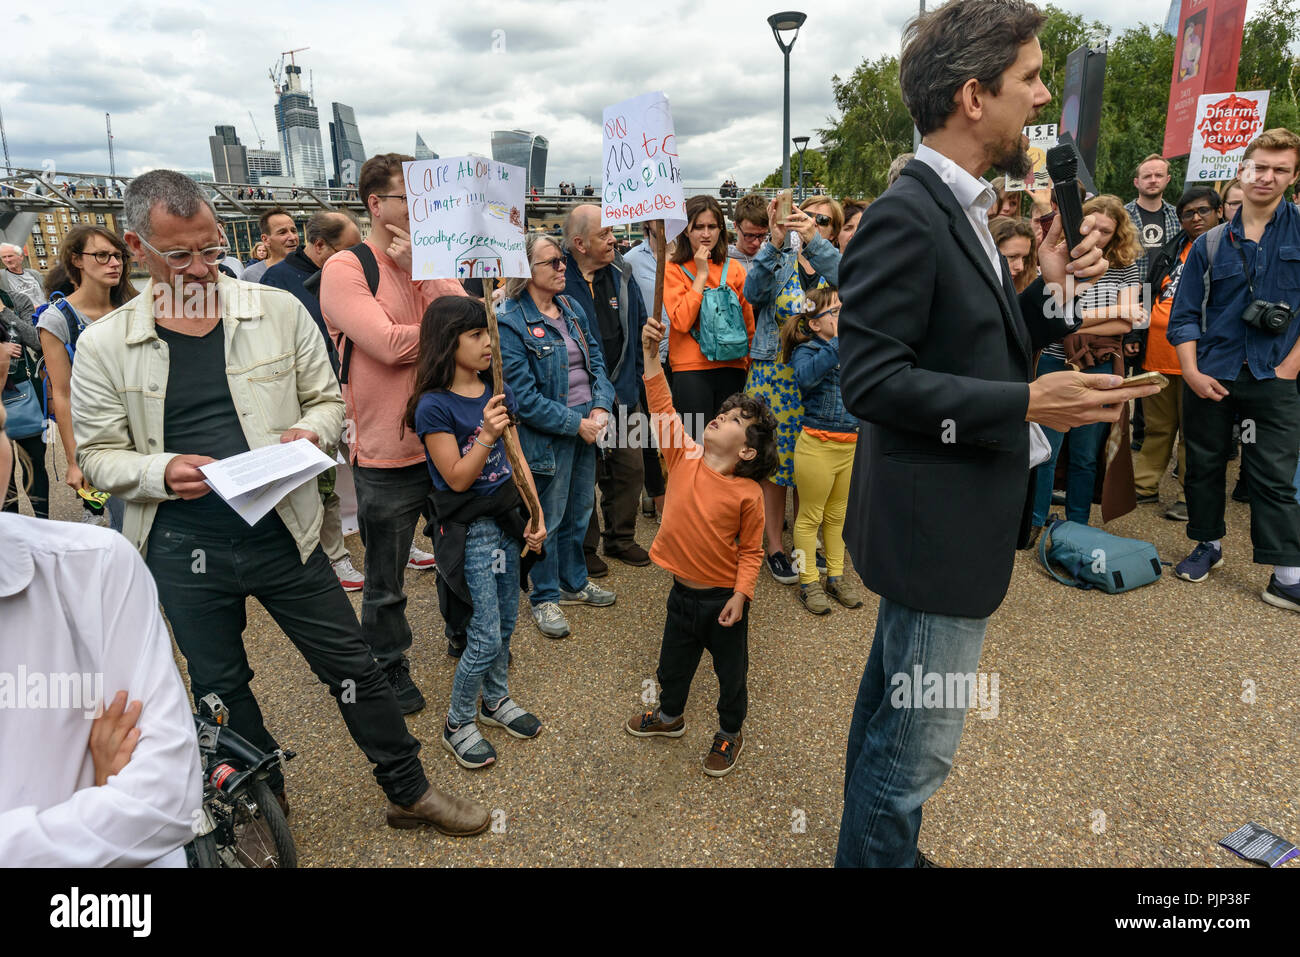 London, UK. 8th September 2018. Adam Woodhall of Inspiring Sustainability speaks at the Climate Reality rally outside Tate Modern, one of thousands around the world demanding urgent action by government leaders to leaders commit to a fossil free world that works for all of us.  community leaders, organisers, scientists, s Credit: Peter Marshall/Alamy Live News Stock Photo